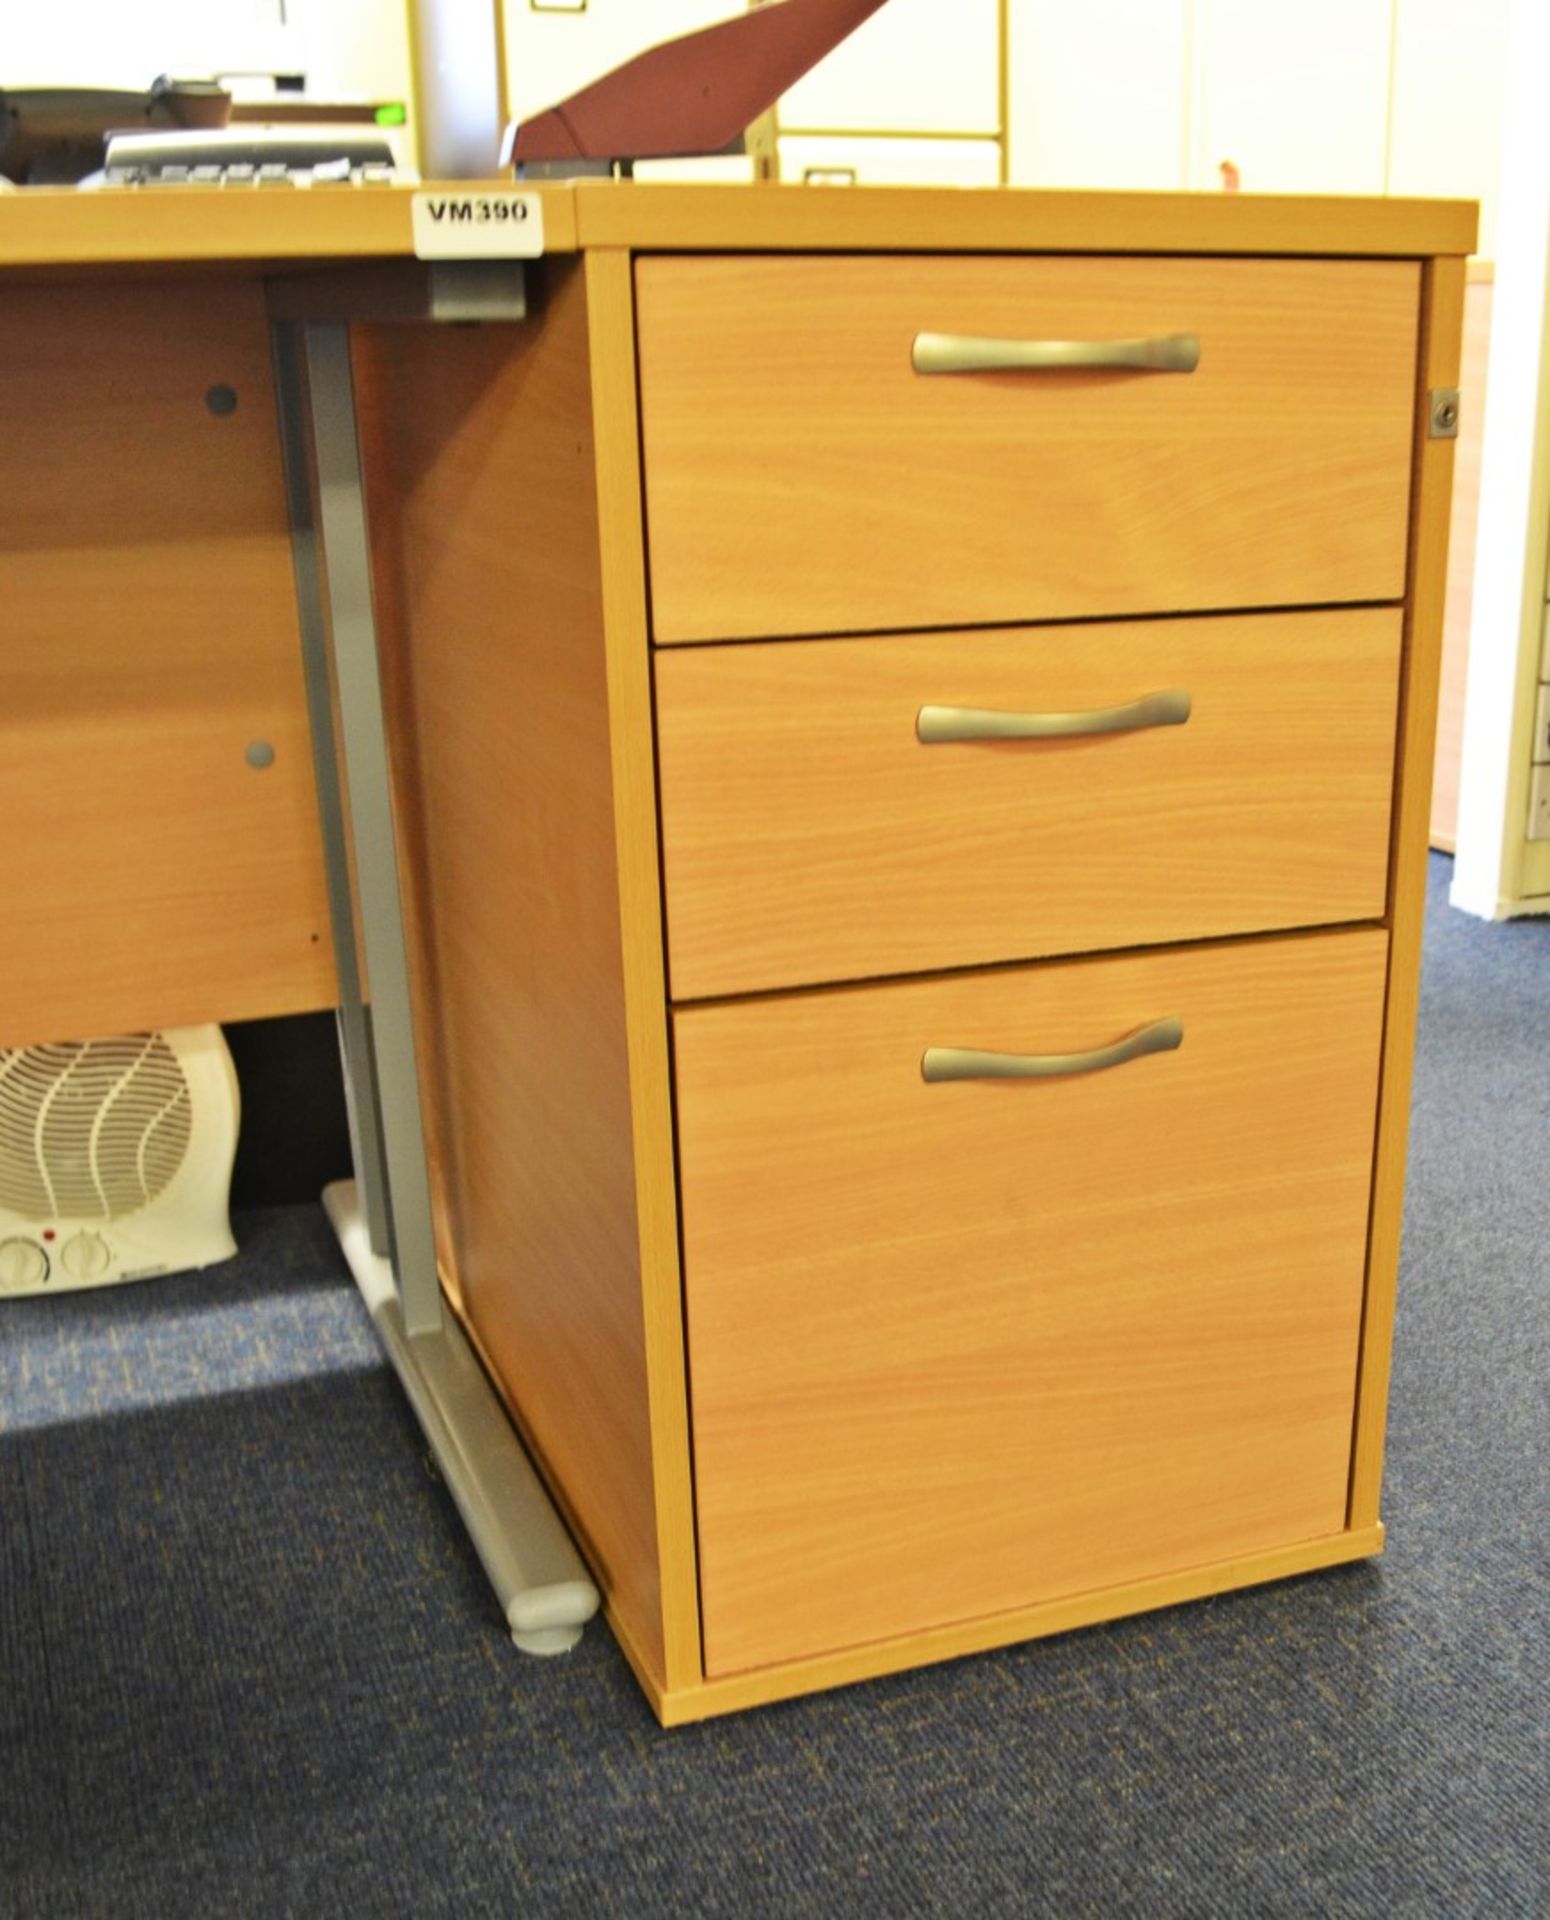 1 x Beech Office Desk And Pedestal - Ref: VM390 - CL409 - Location Wakefield WF16 - Image 4 of 4